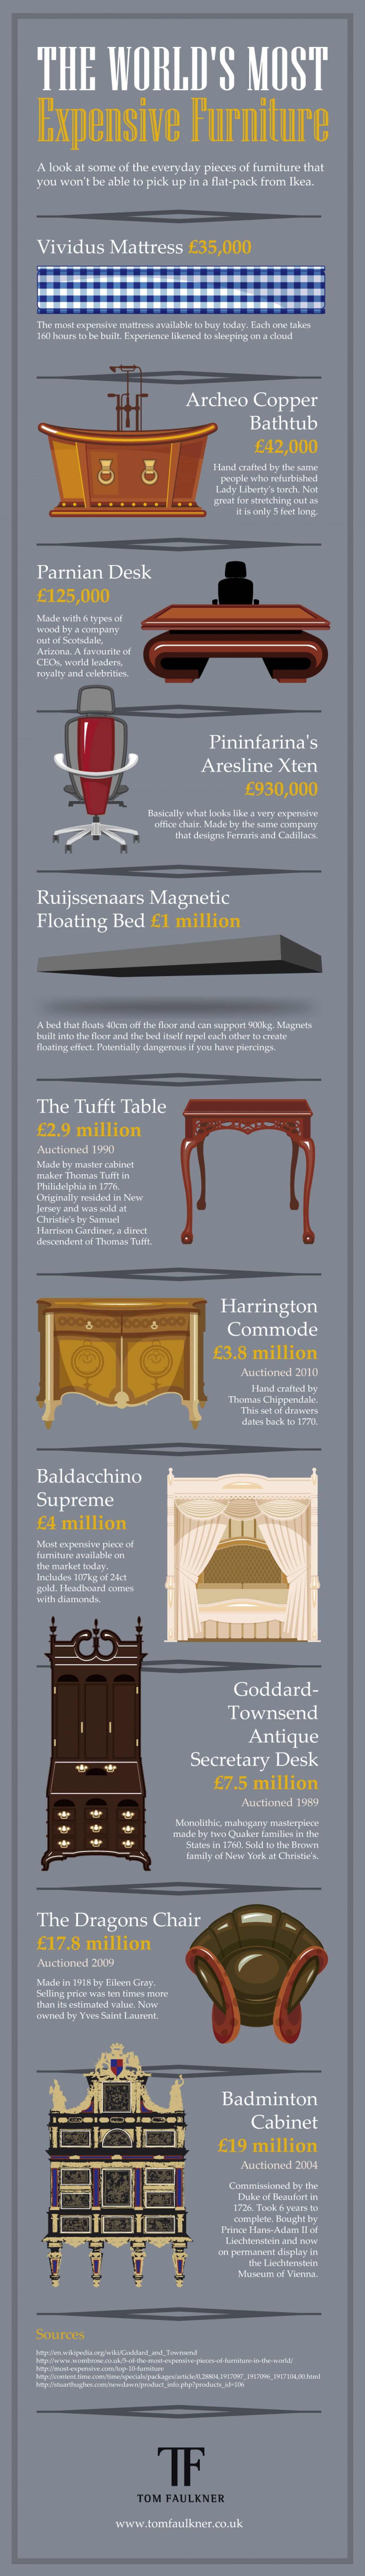 The World's Most Expensive Custom Furniture